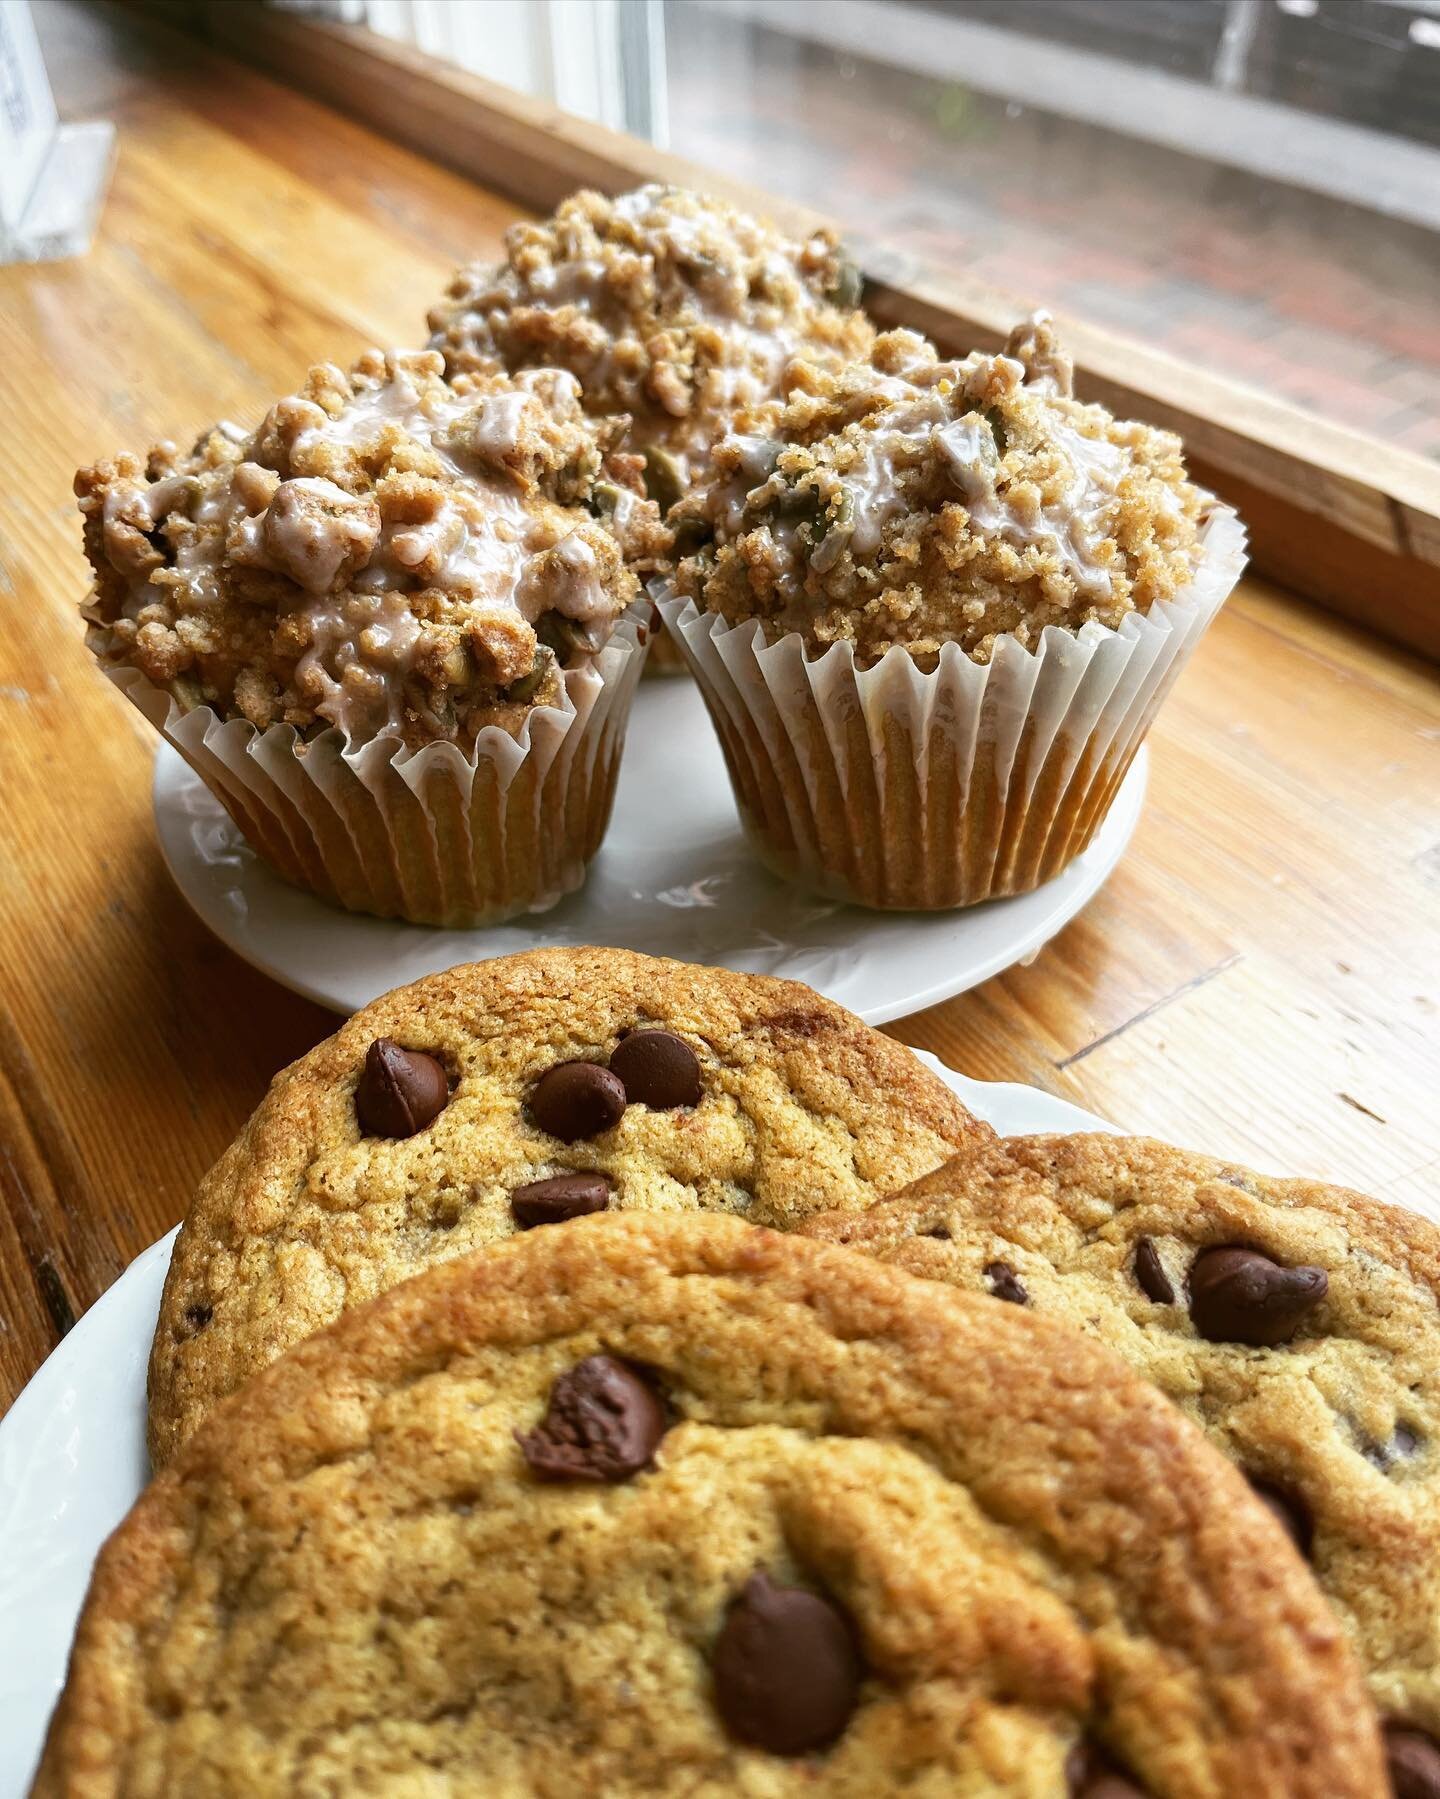 Vegan pumpkin muffins and some pumpkin chocolate chip cookies with a warm cuppa? Tasty snacks for this fall like weather.